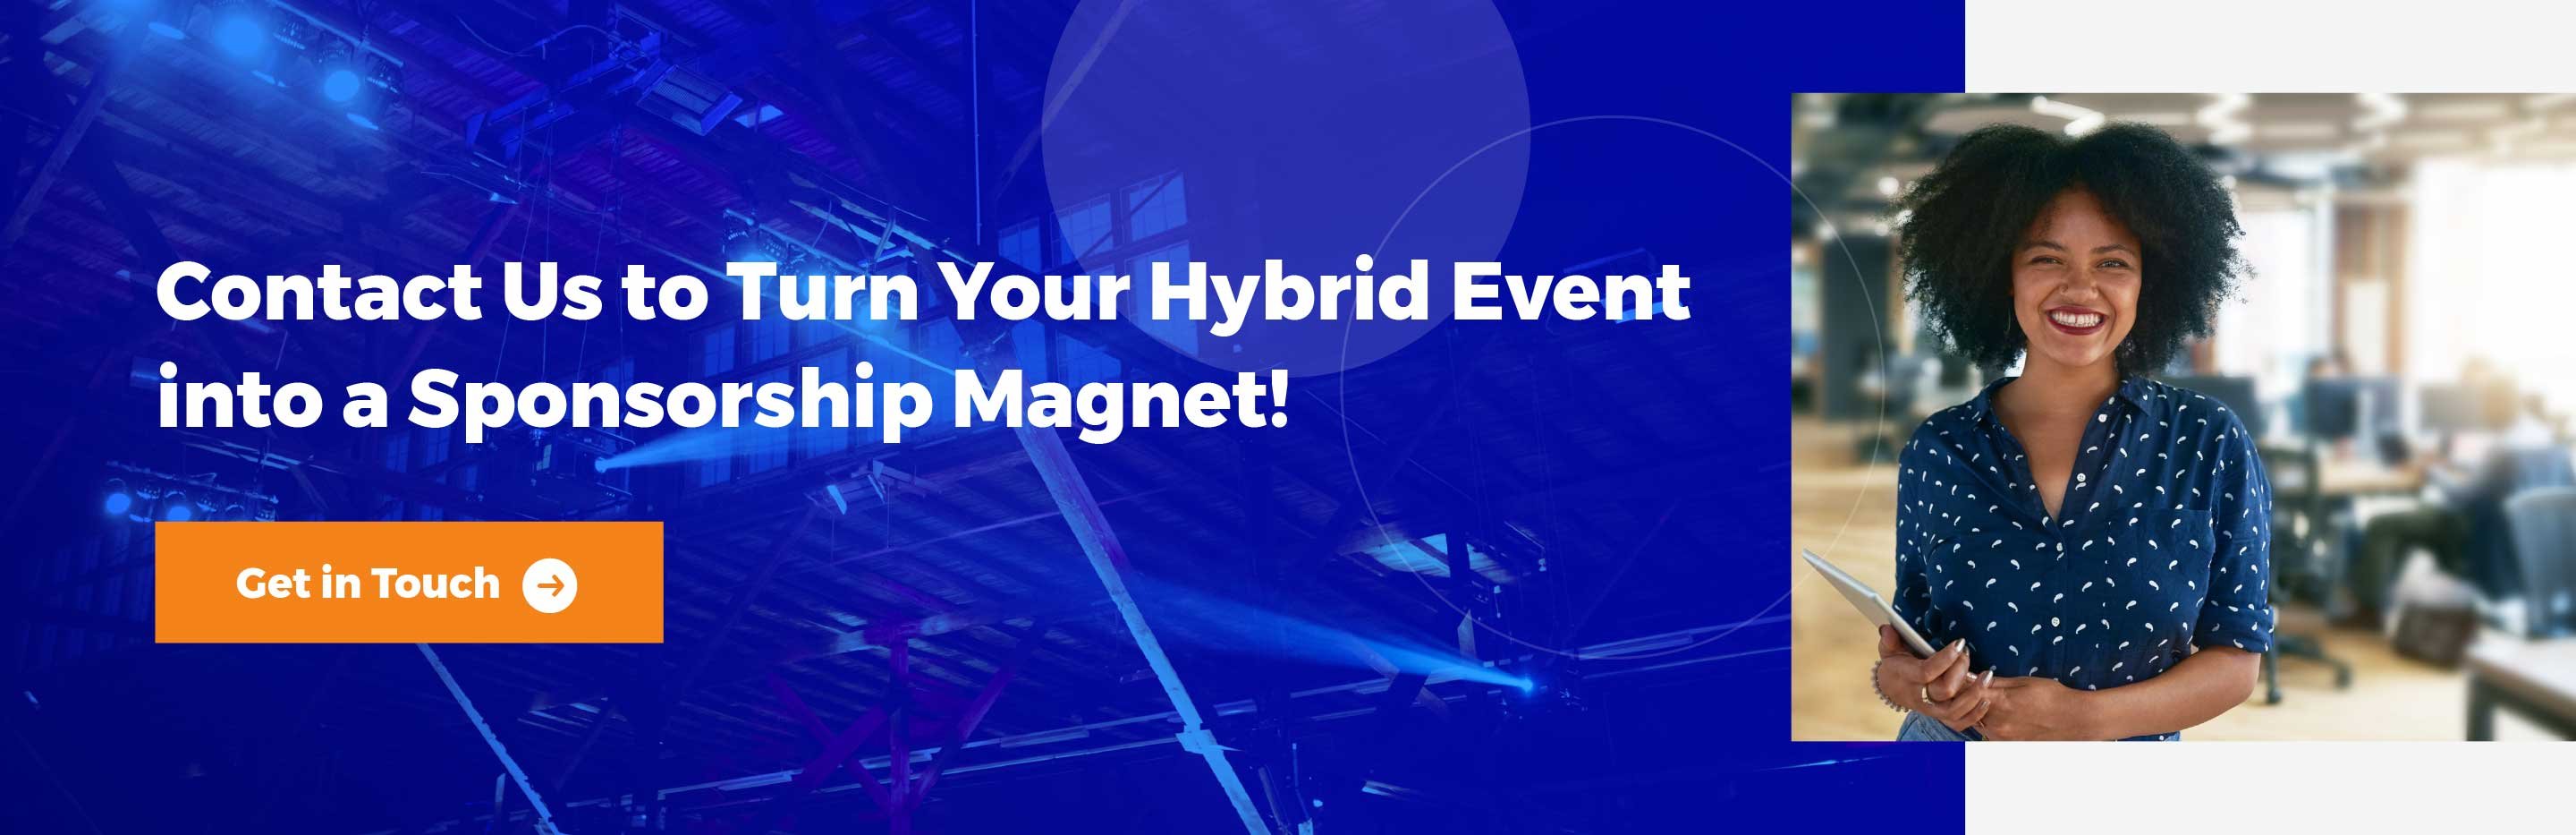 Amp Events: Hybrid Event Sponsorships - Contact us